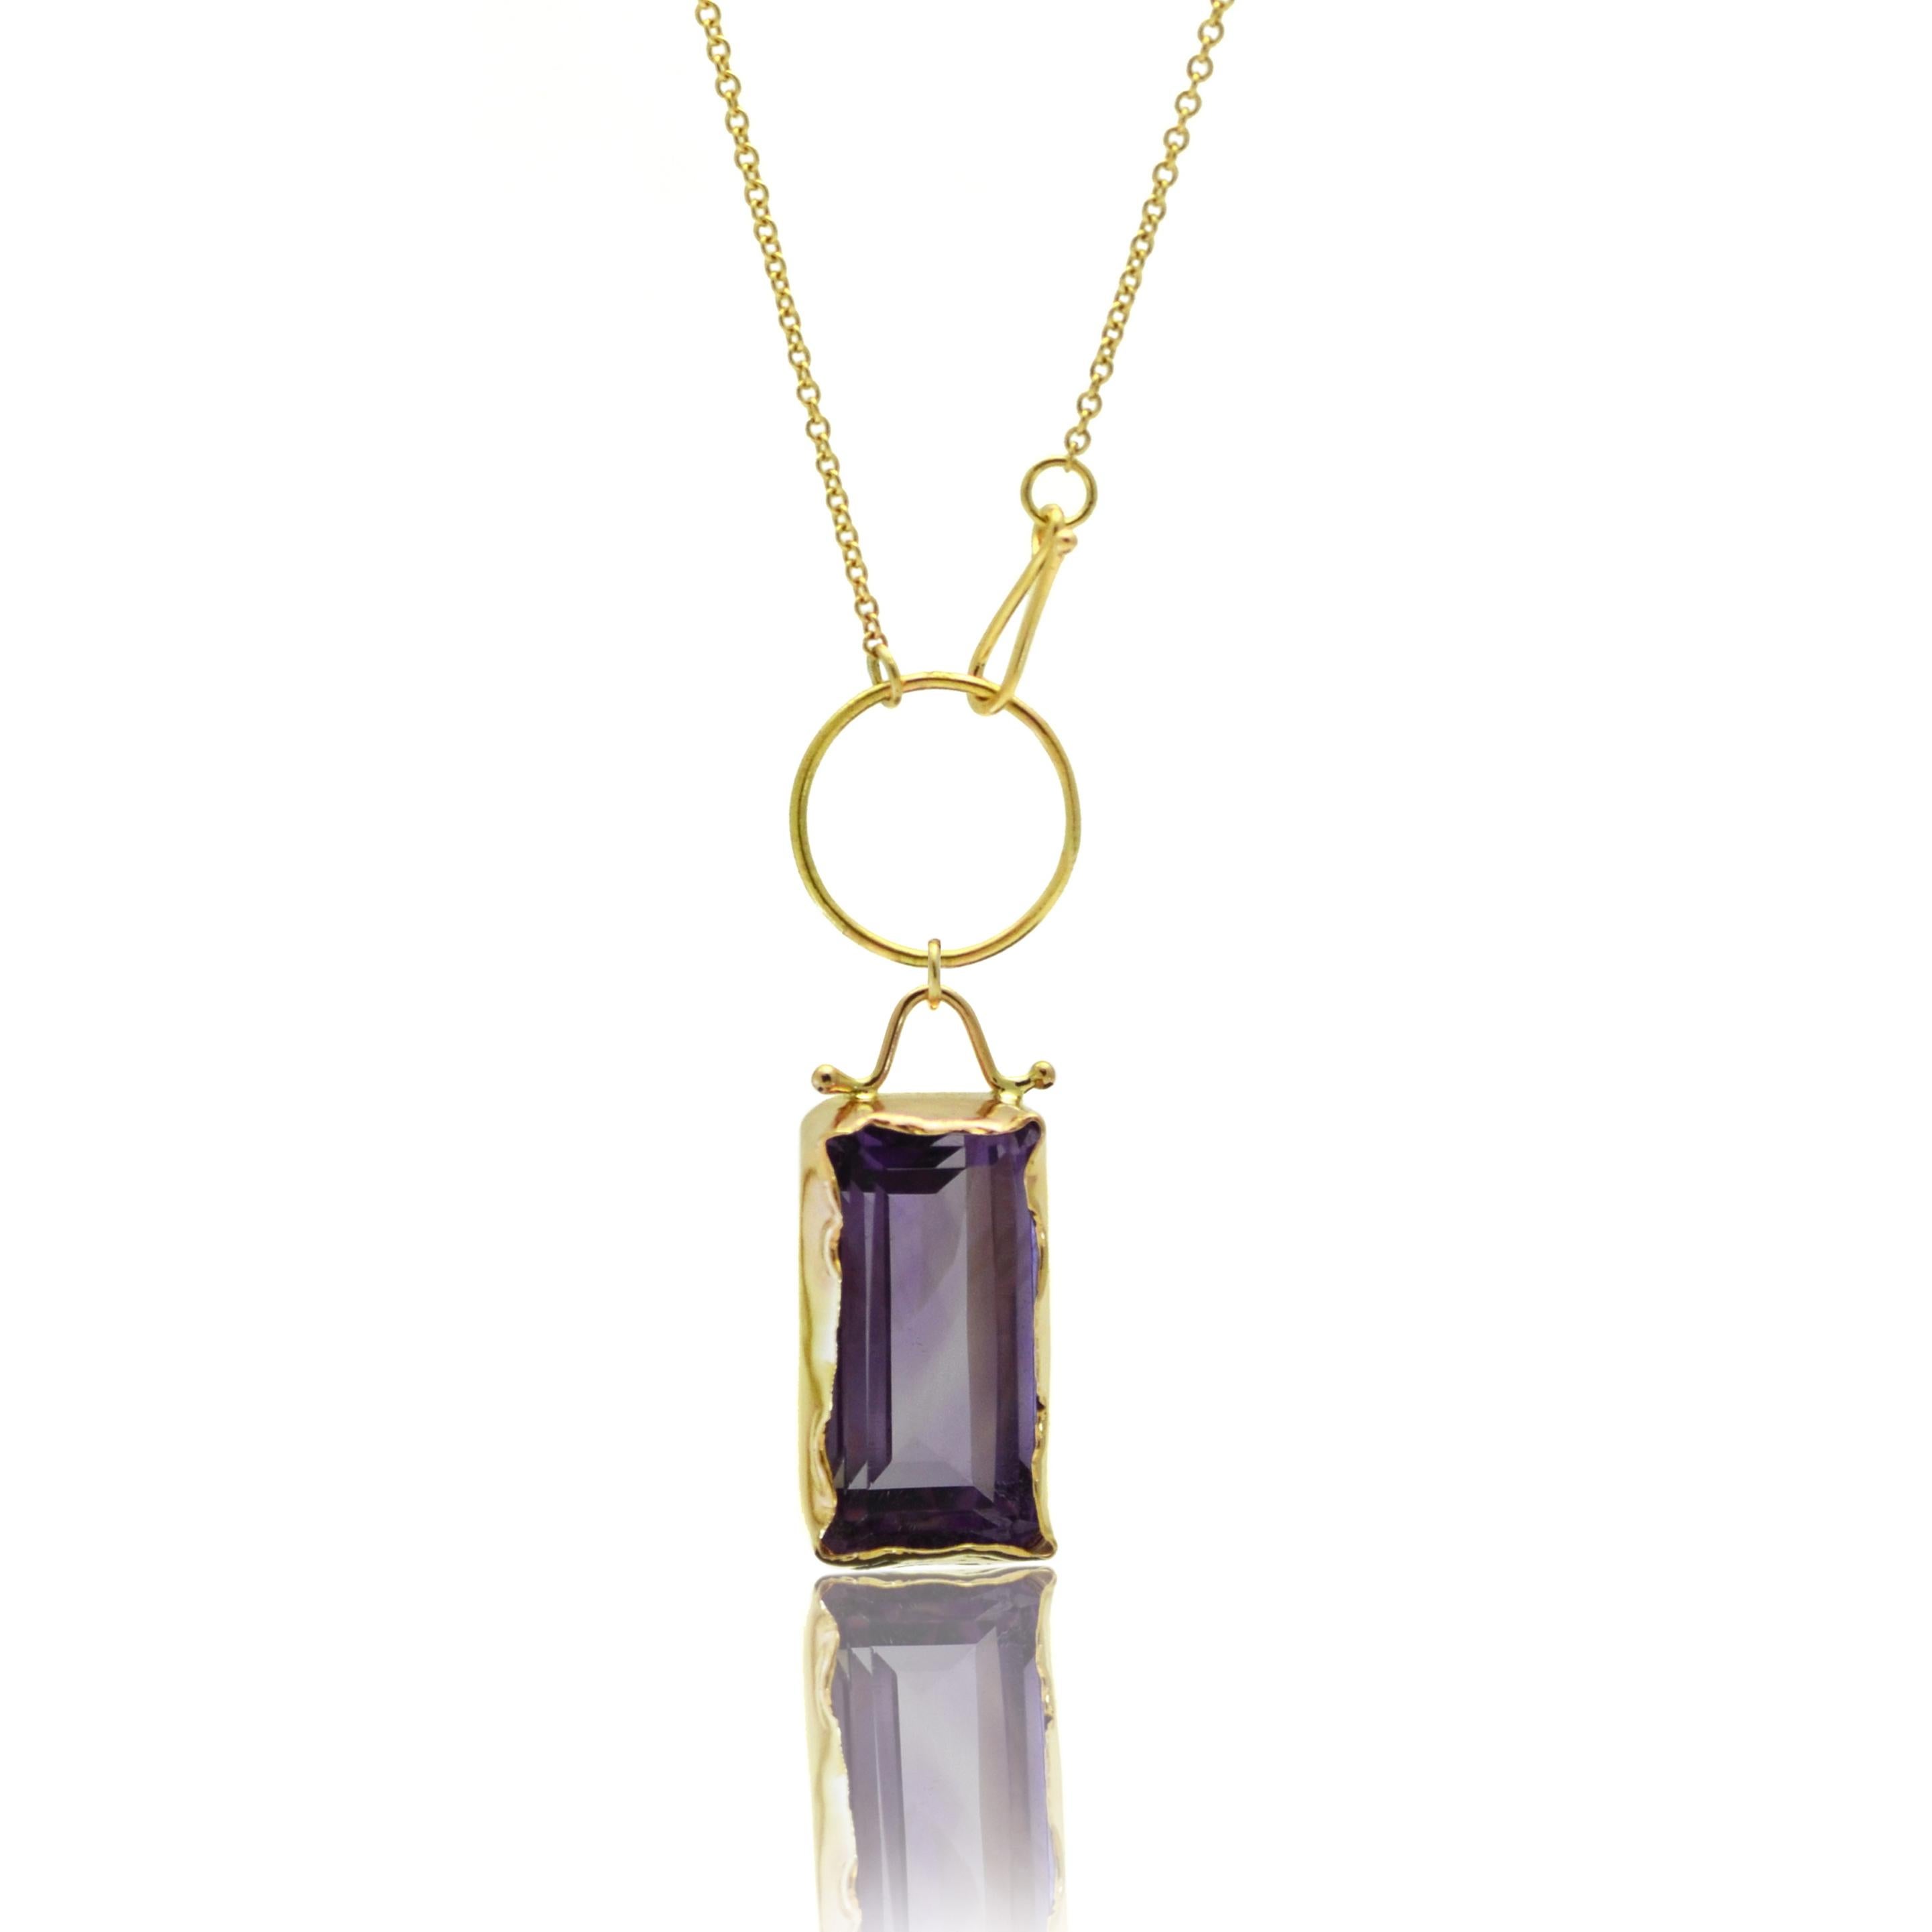 Hand fabricated from 14kt yellow gold by Susan Crow, the Amethyst and Yellow Gold Lariat Pendant is a one-of-a-kind piece that offers heirloom quality to your jewelry collection. The large 22ct emerald-cut Amethyst has a sensual exposed back setting